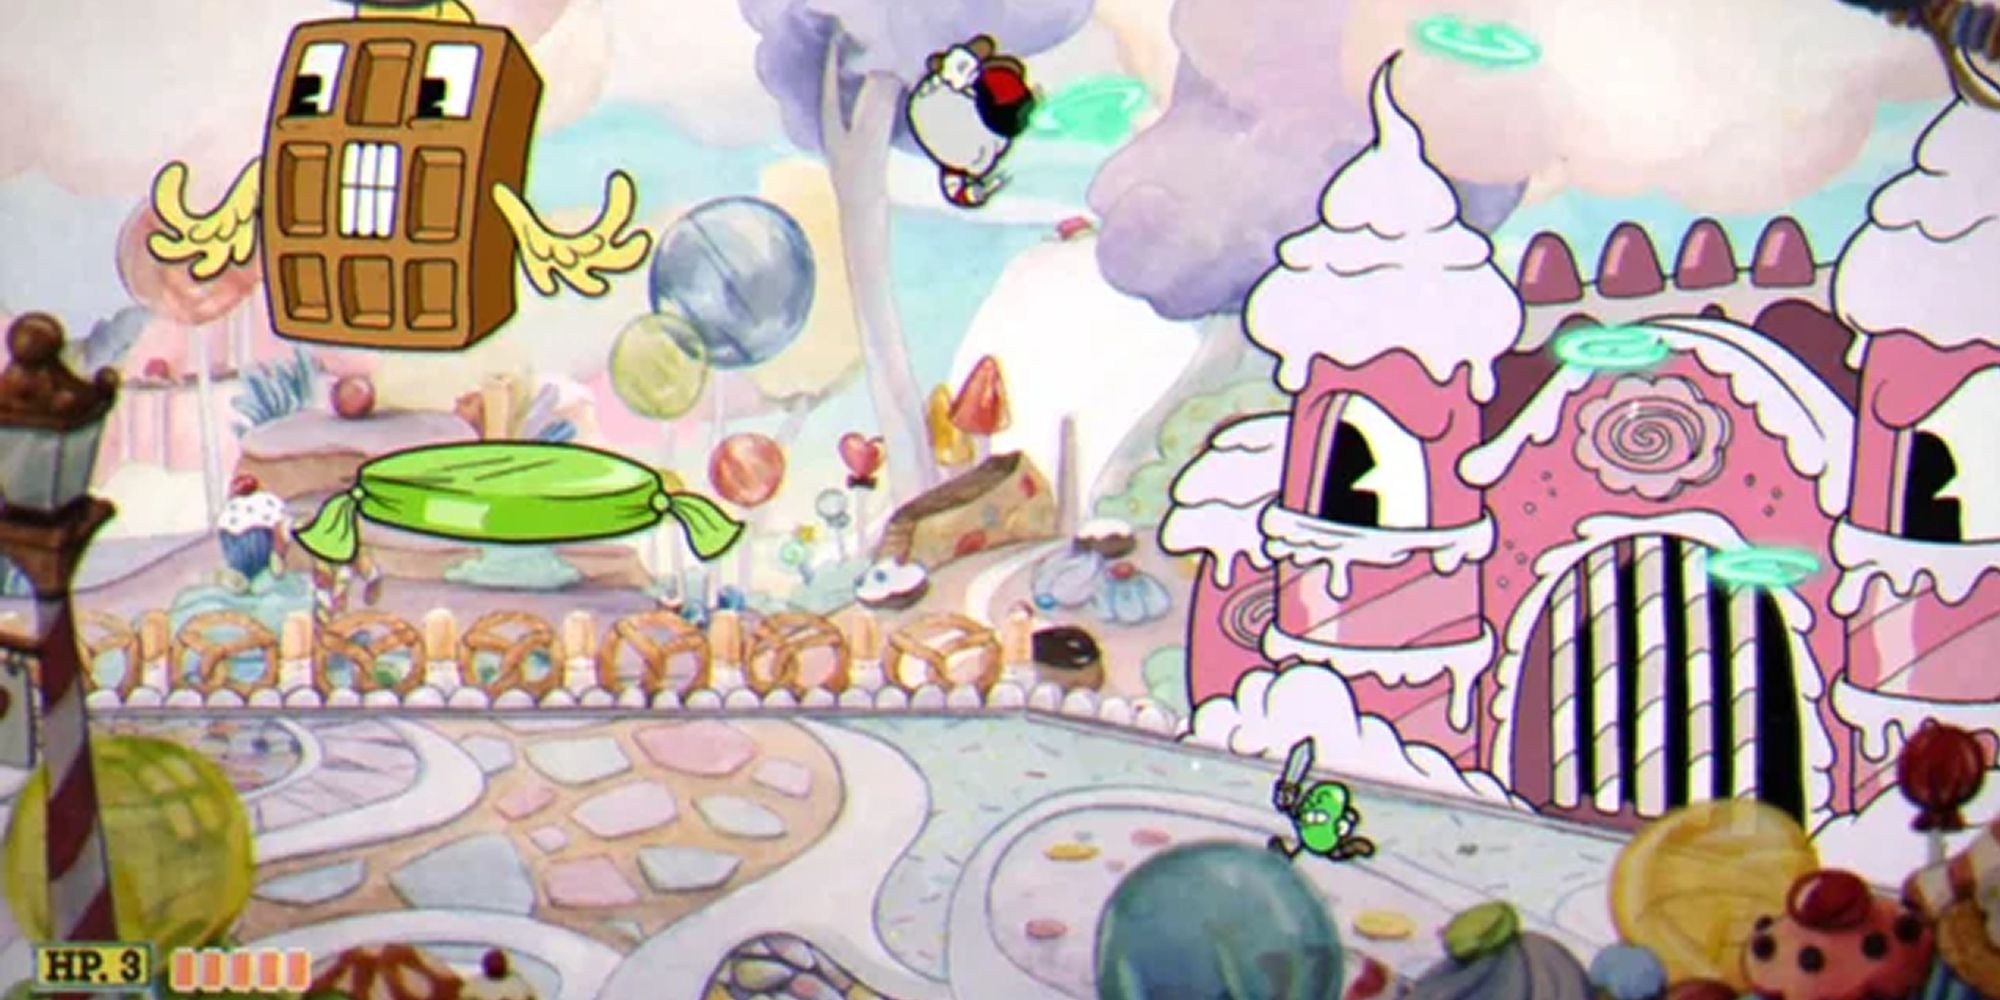 Roundabout attack in a candy kingdom